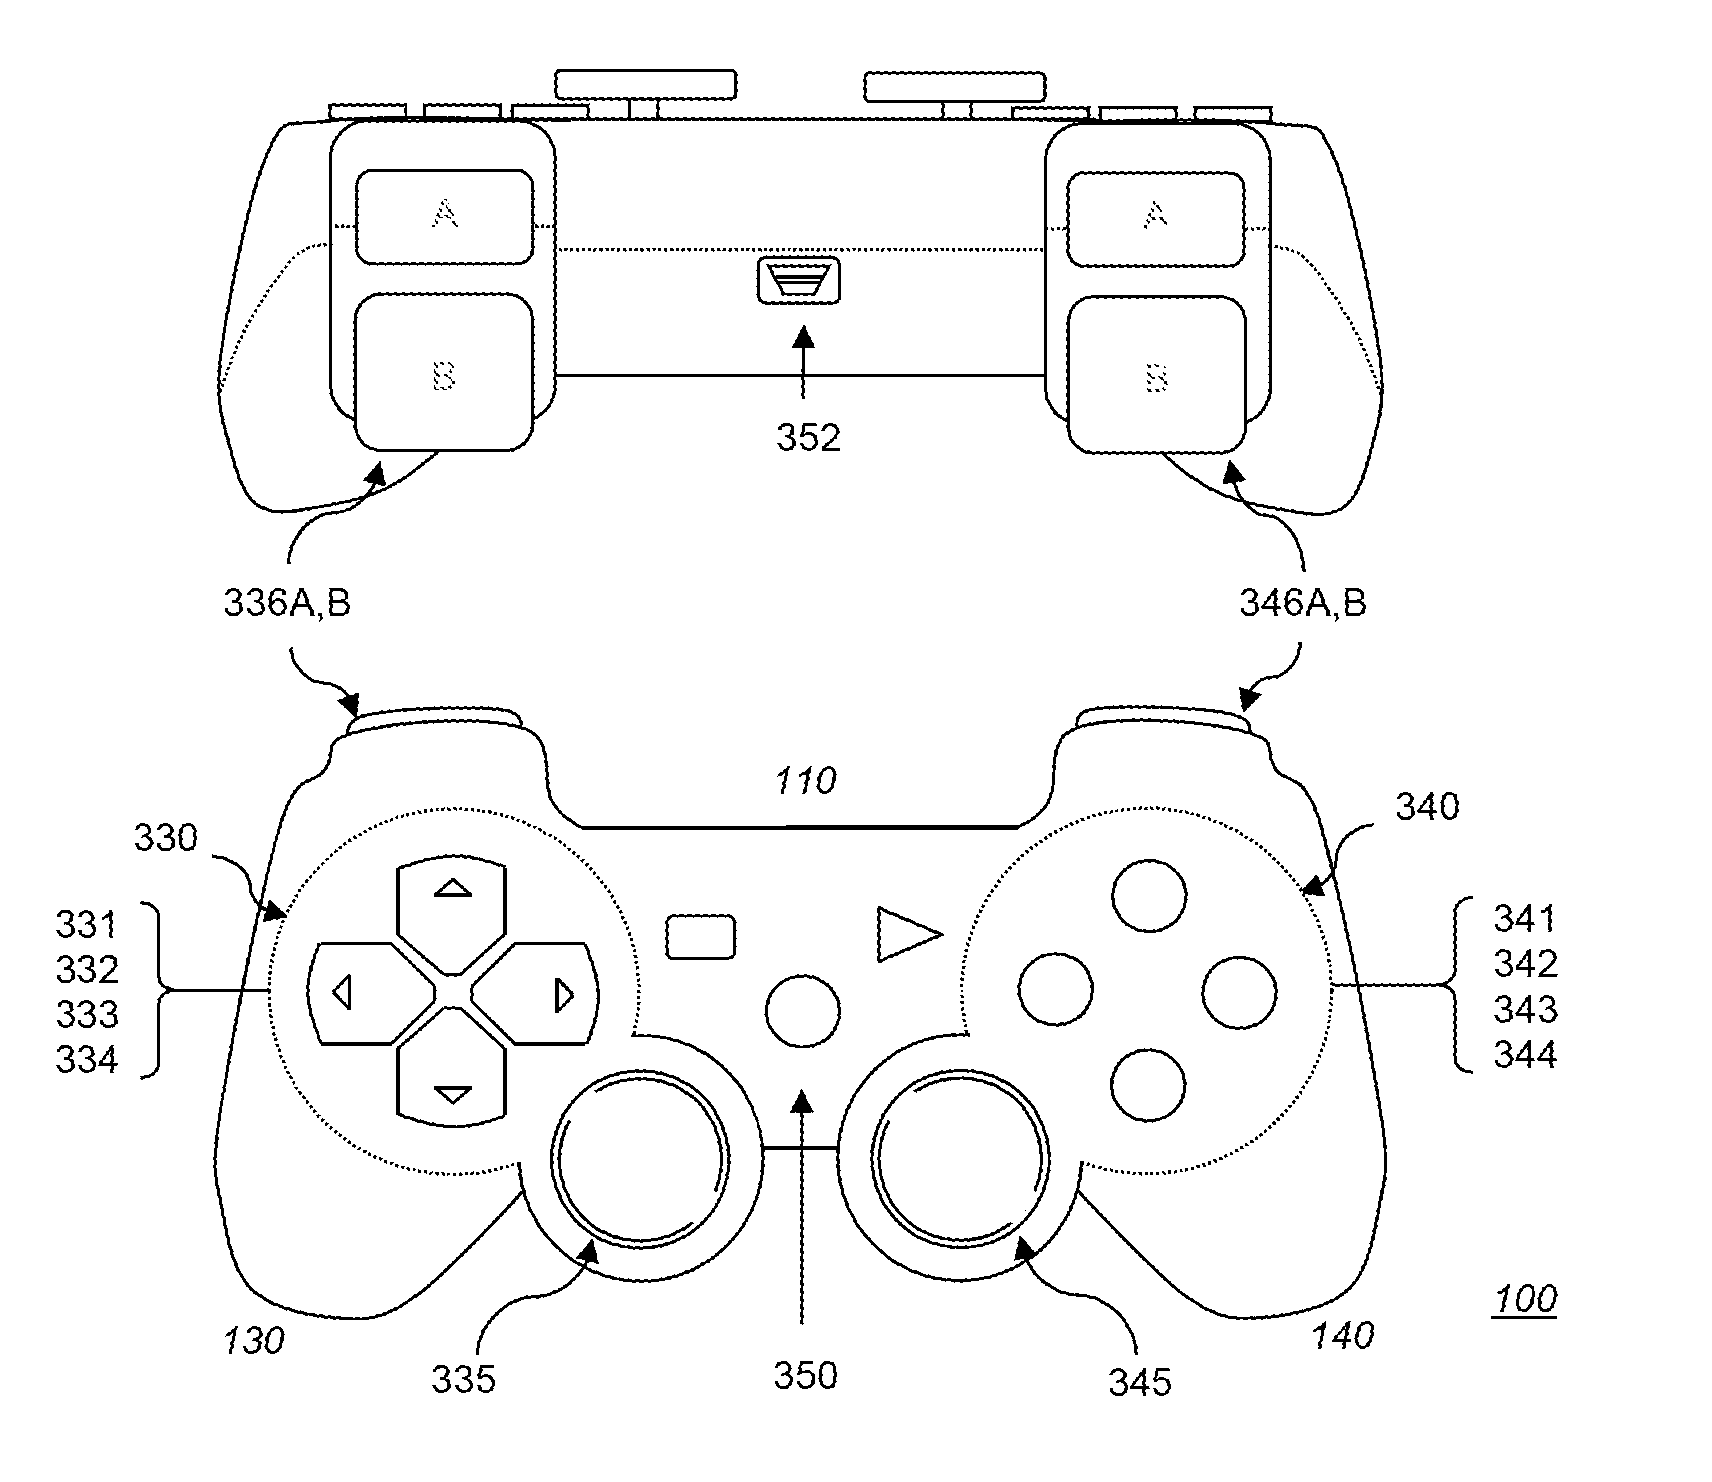 Peripheral apparatus and method of construction